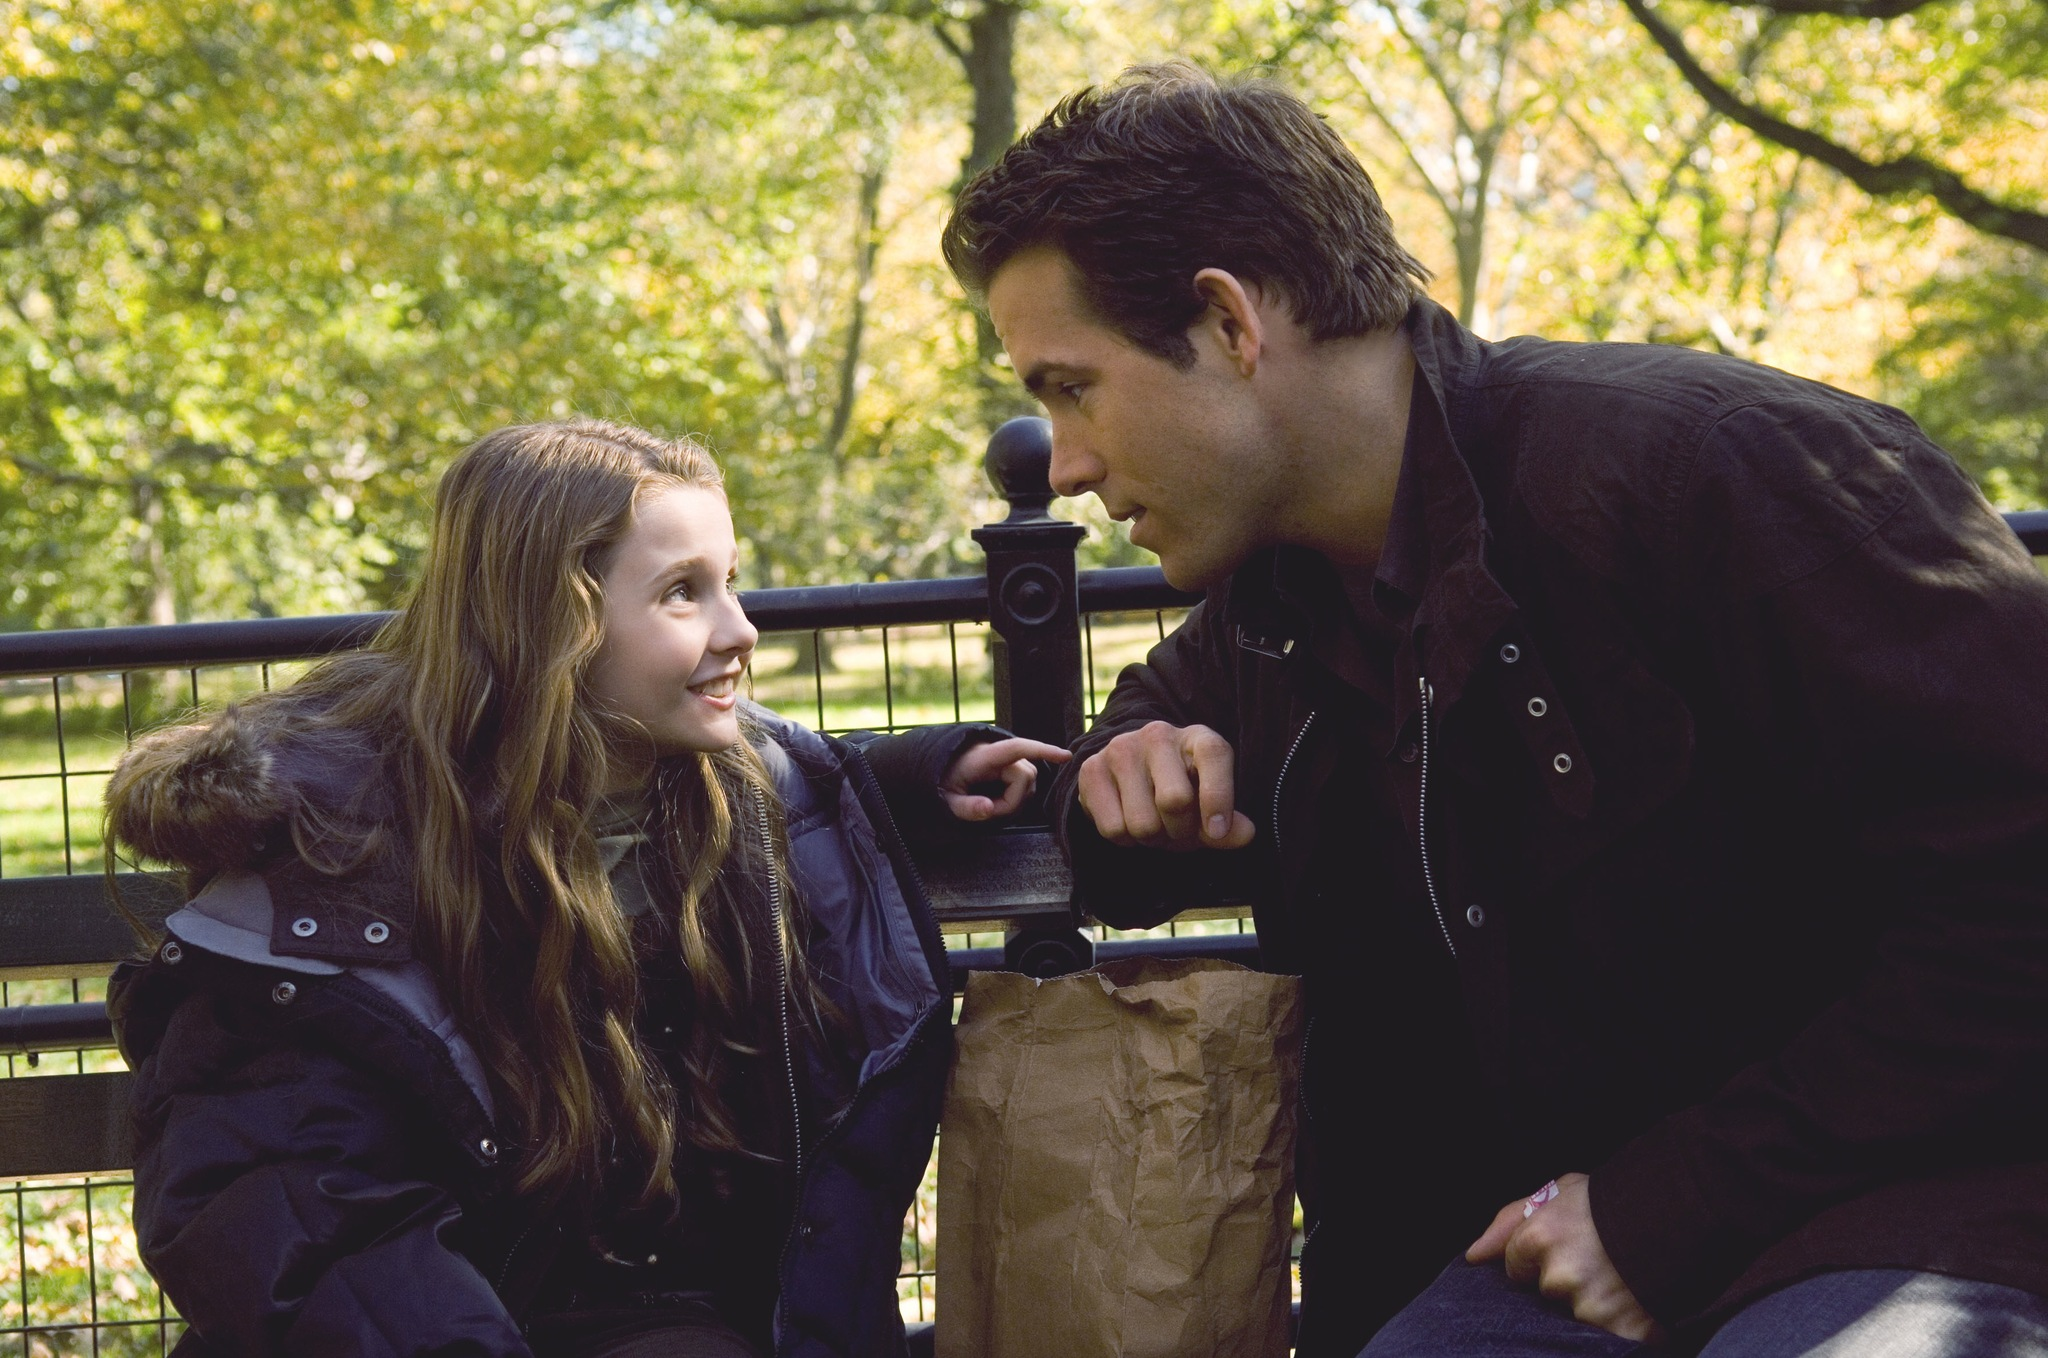 Will is talking his daughter in a park in Crazy, Stupid, Love.